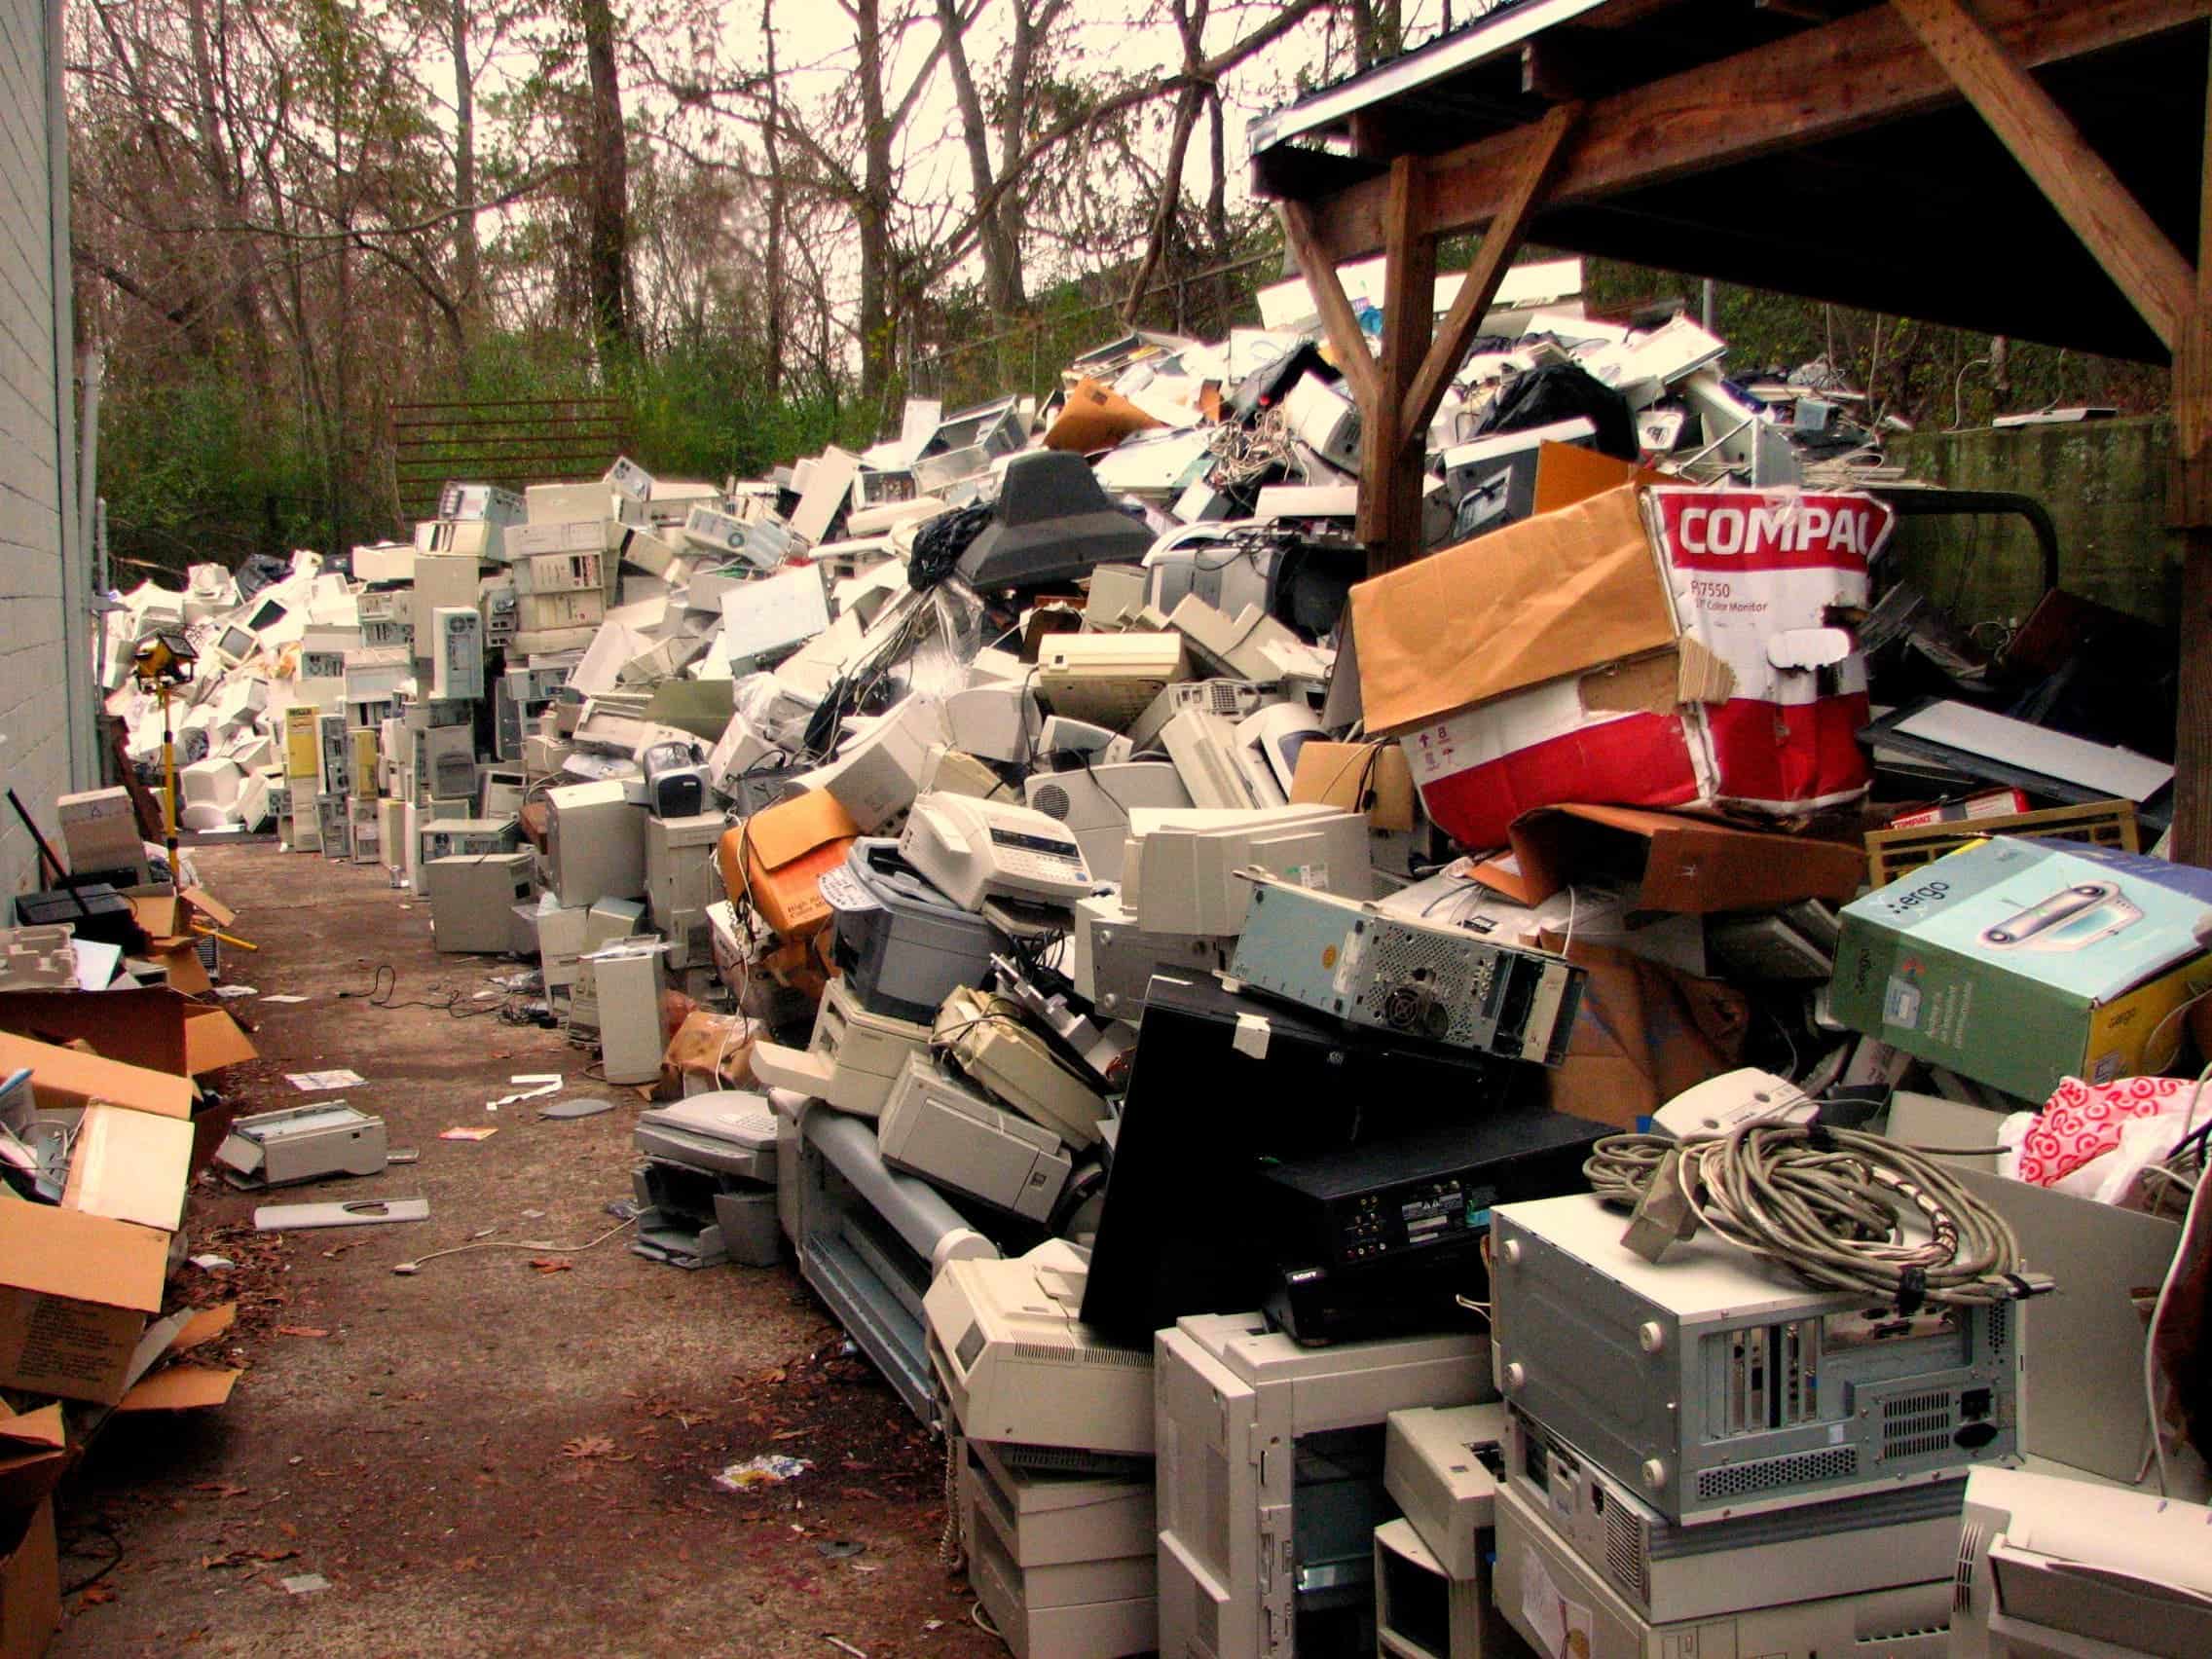 E-waste is piling up. Image credits: Curtis Palmer.